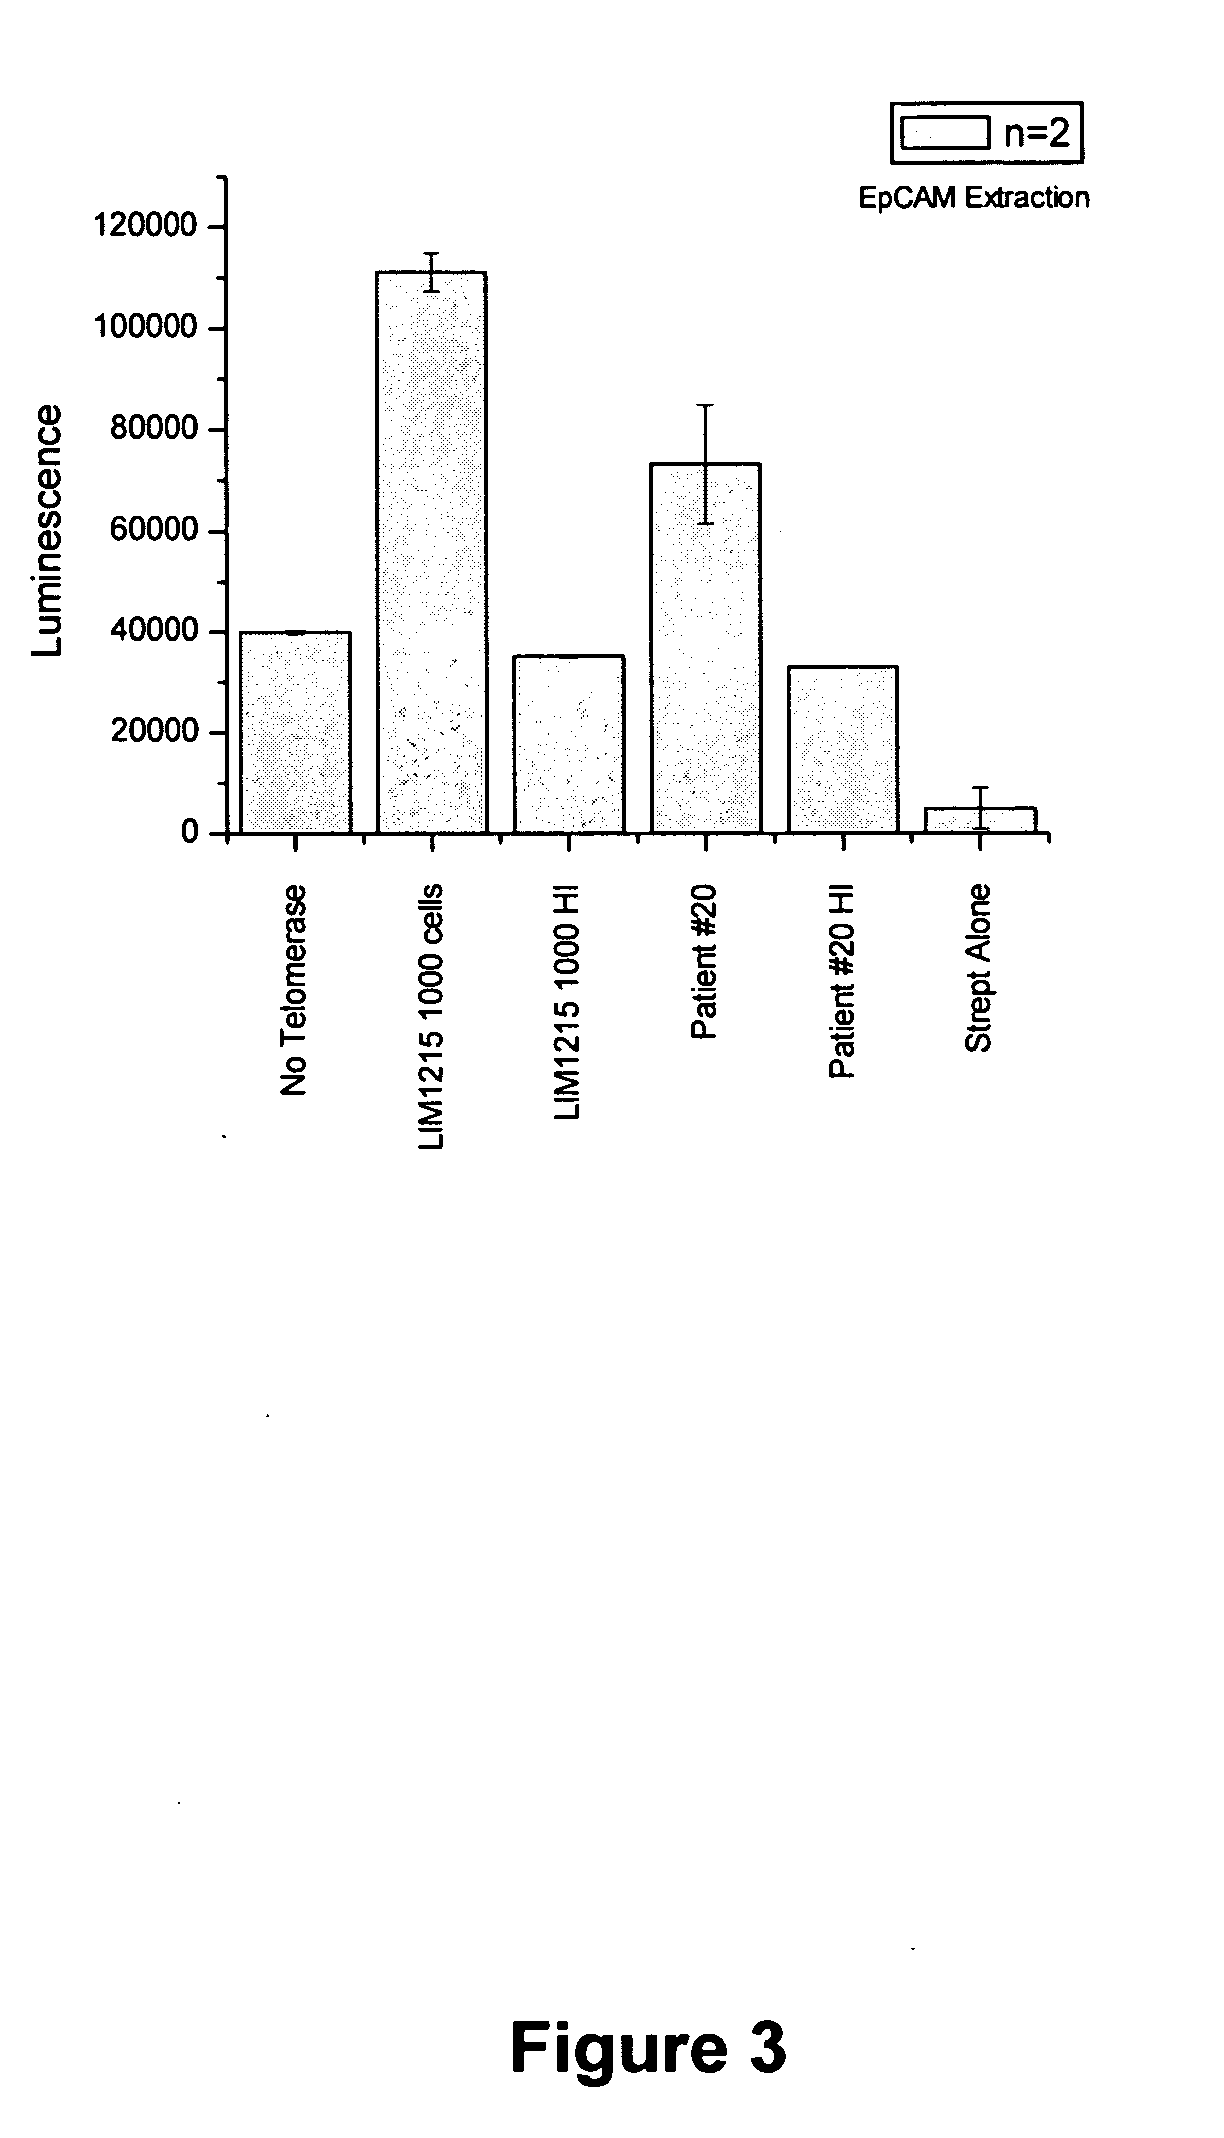 Methods of assaying for telomerase activity and compositions related to same